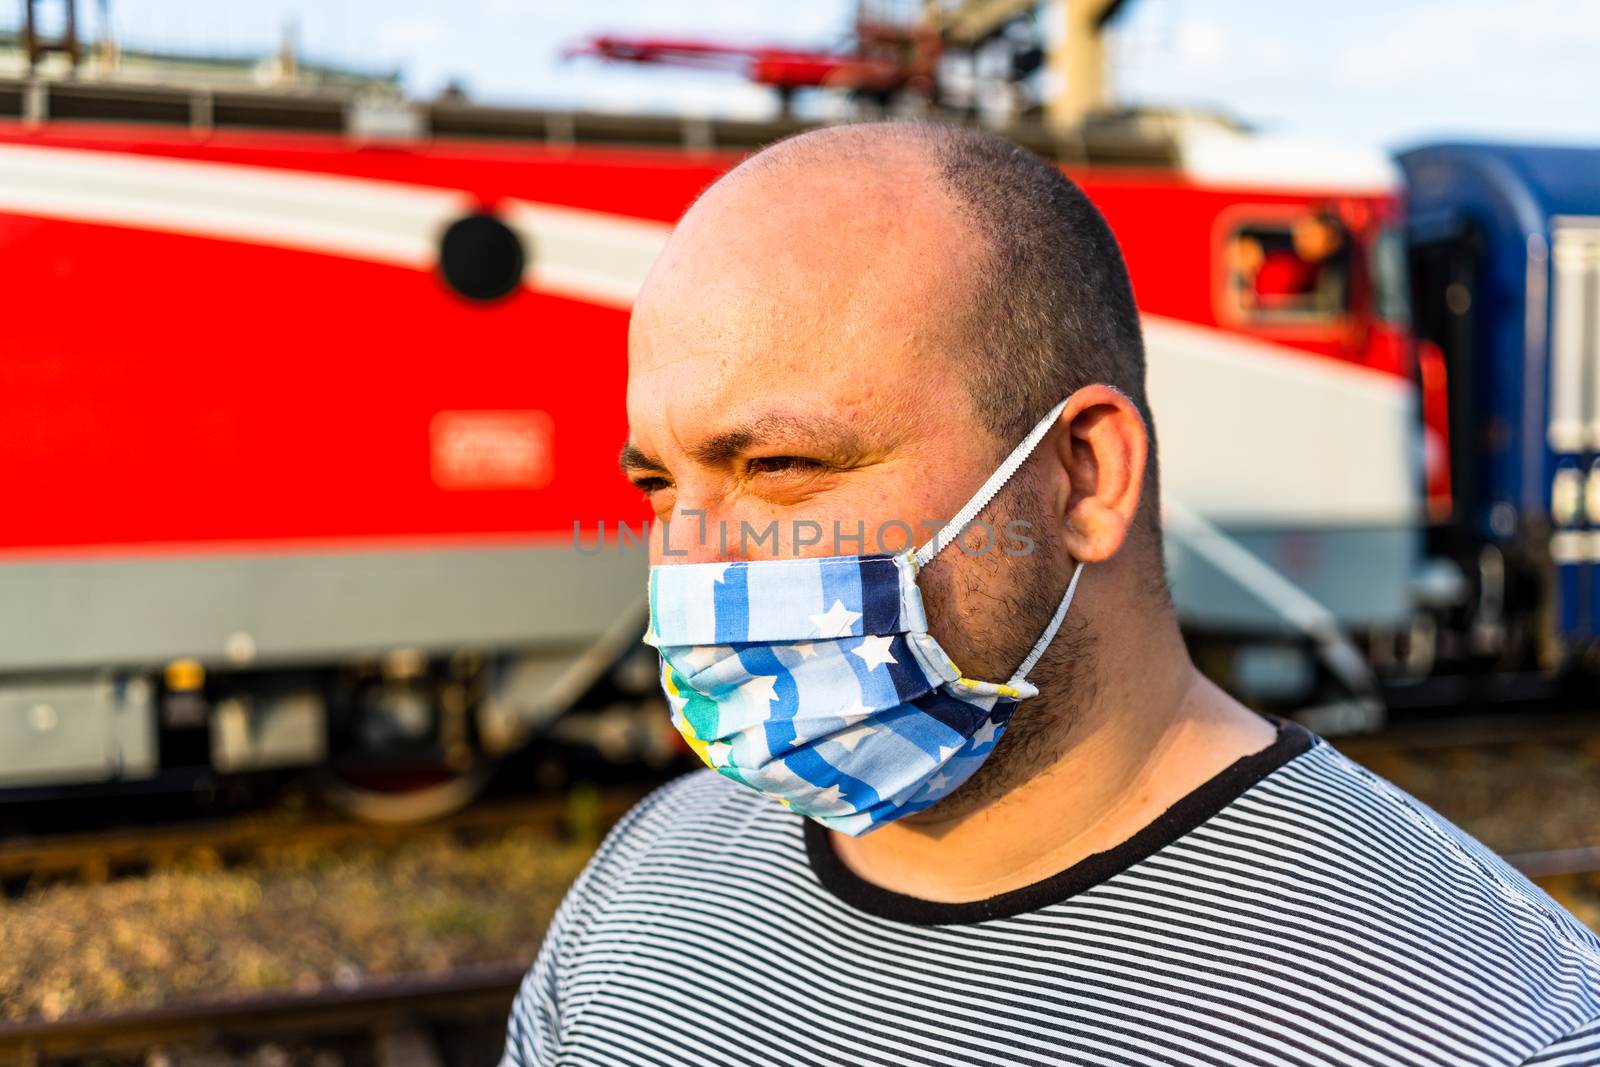 Young man with medical protective face mask illustrates pandemic coronavirus disease on blurred background. SARS-CoV-2 outbreak in Europe. Changes and complications caused by epidemic